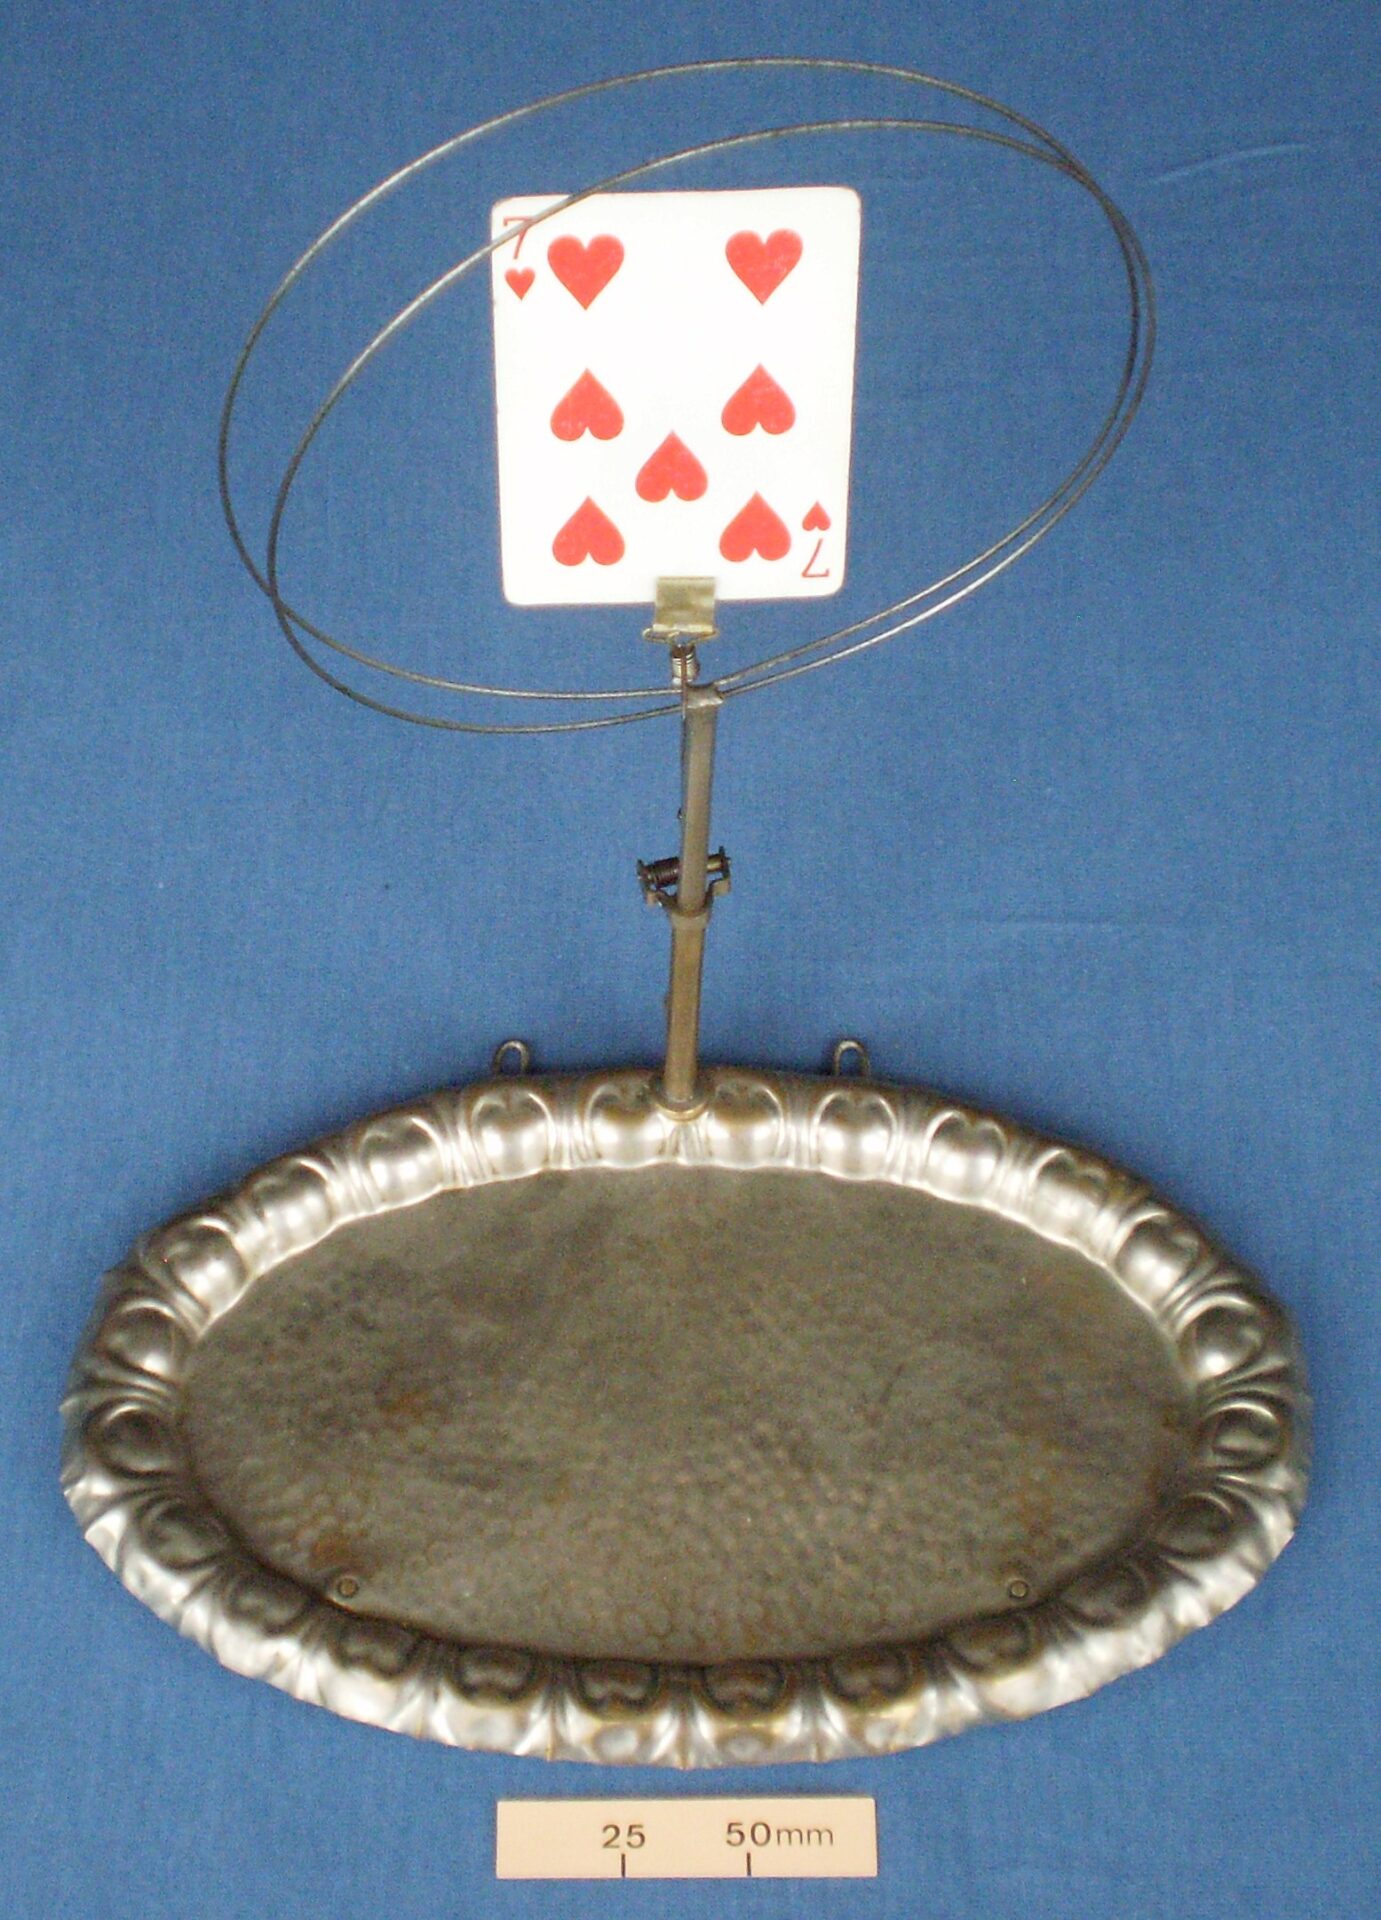 Card in balloon stand